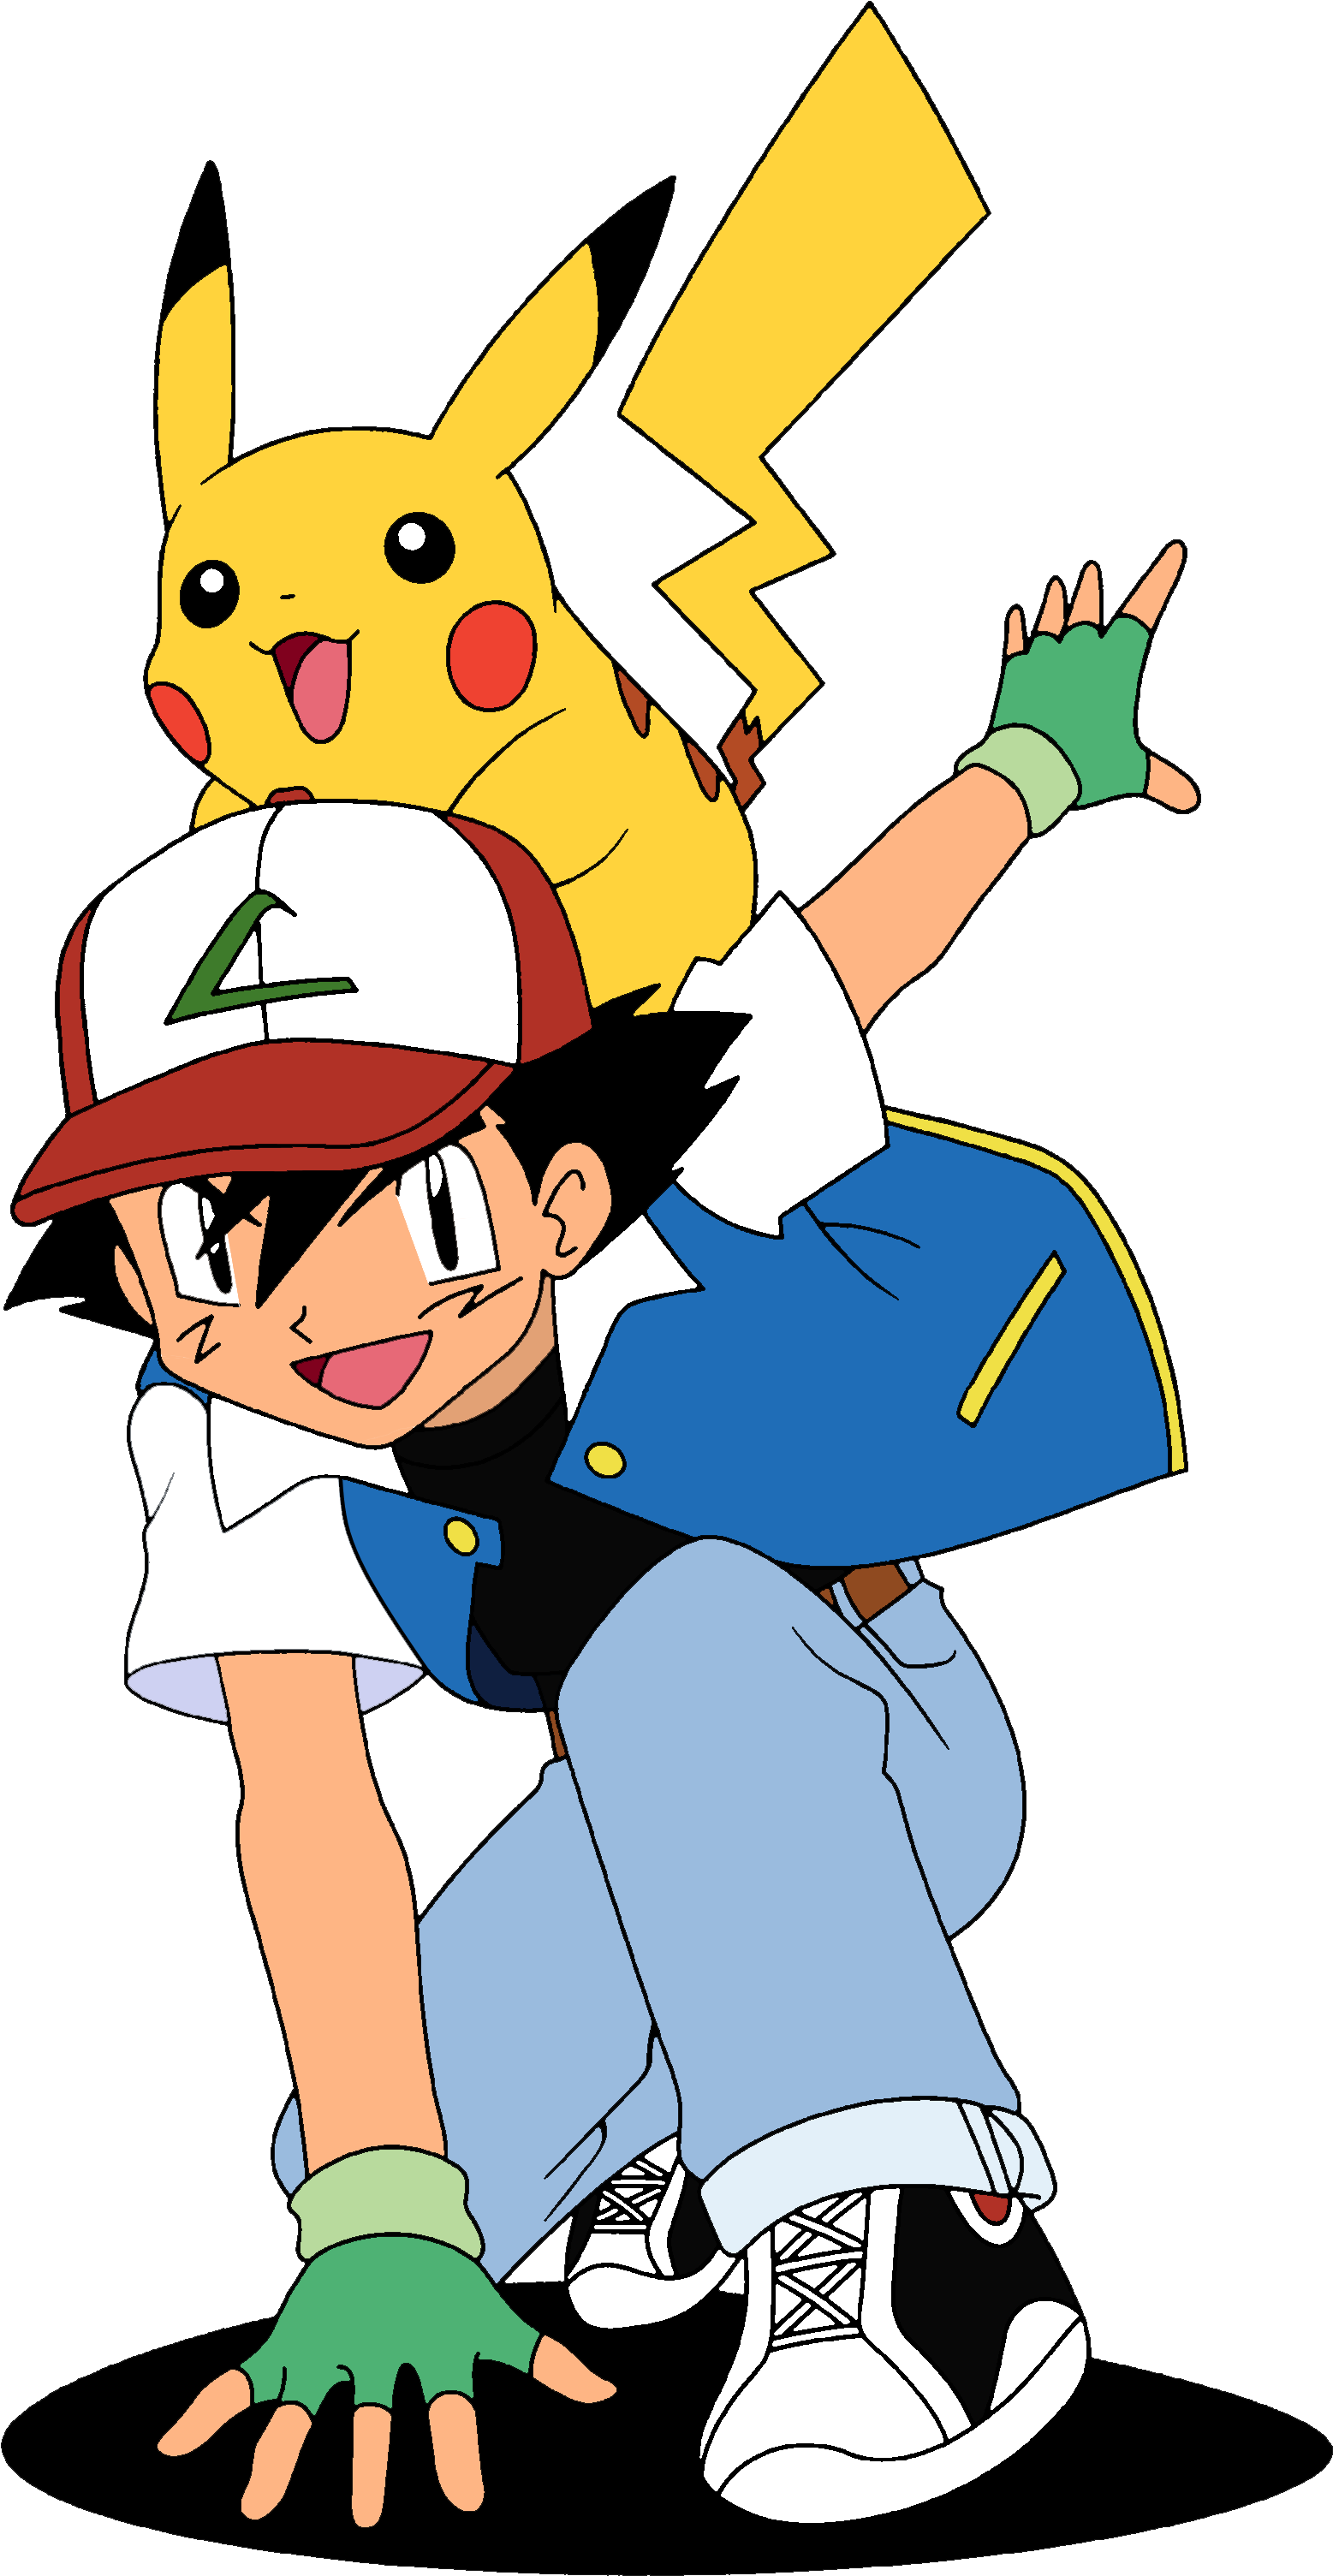 A Memory Of Lifetime As Ash And Pikachu's Journey Ends In Pokemon After 25  Long Years